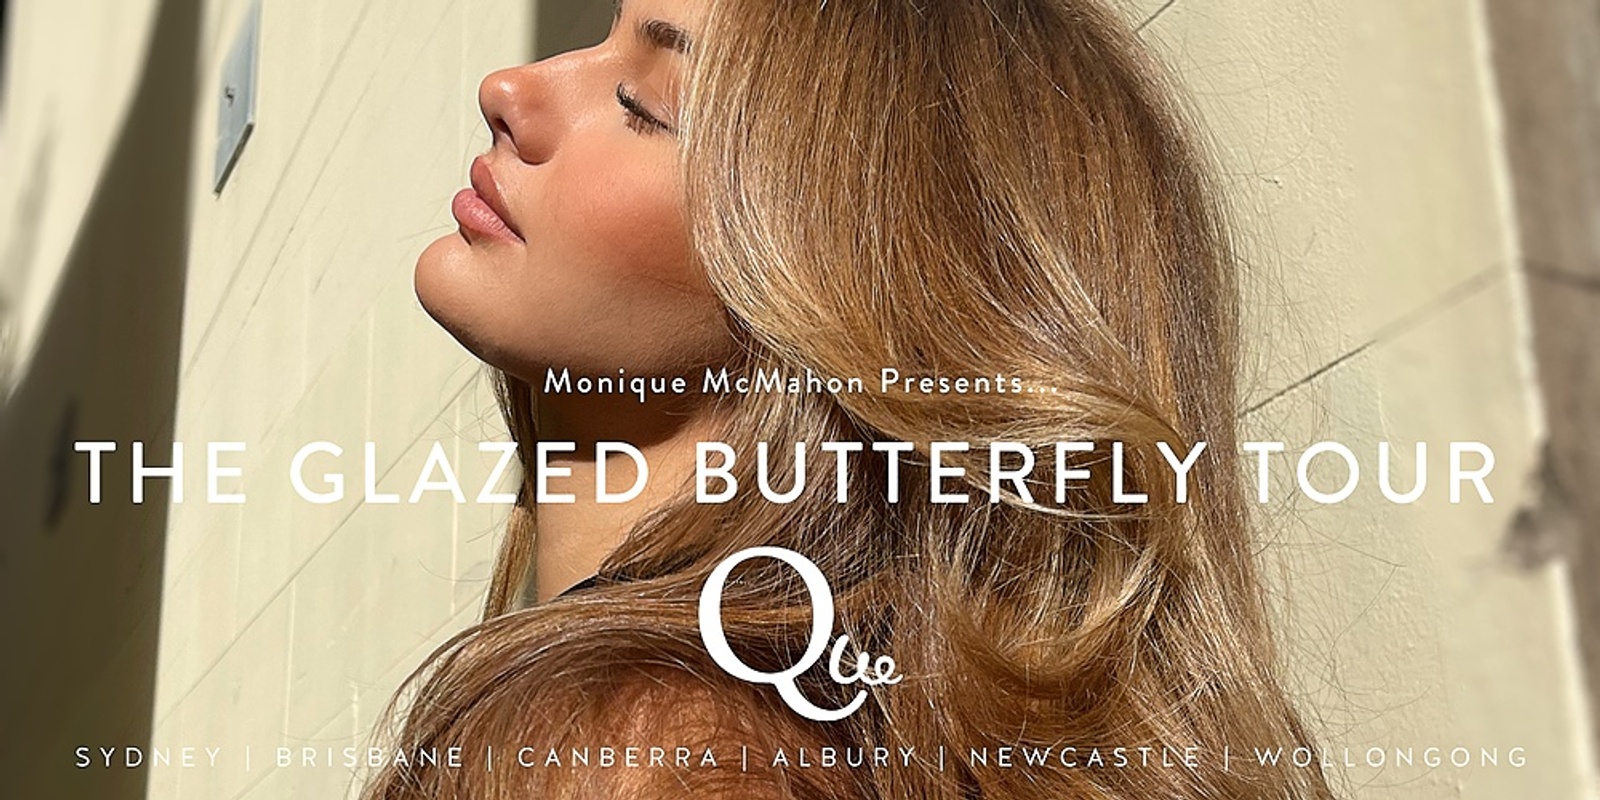 Banner image for NEWCASTLE - Double Glazed Butterfly Tour, presented by Monique McMahon 